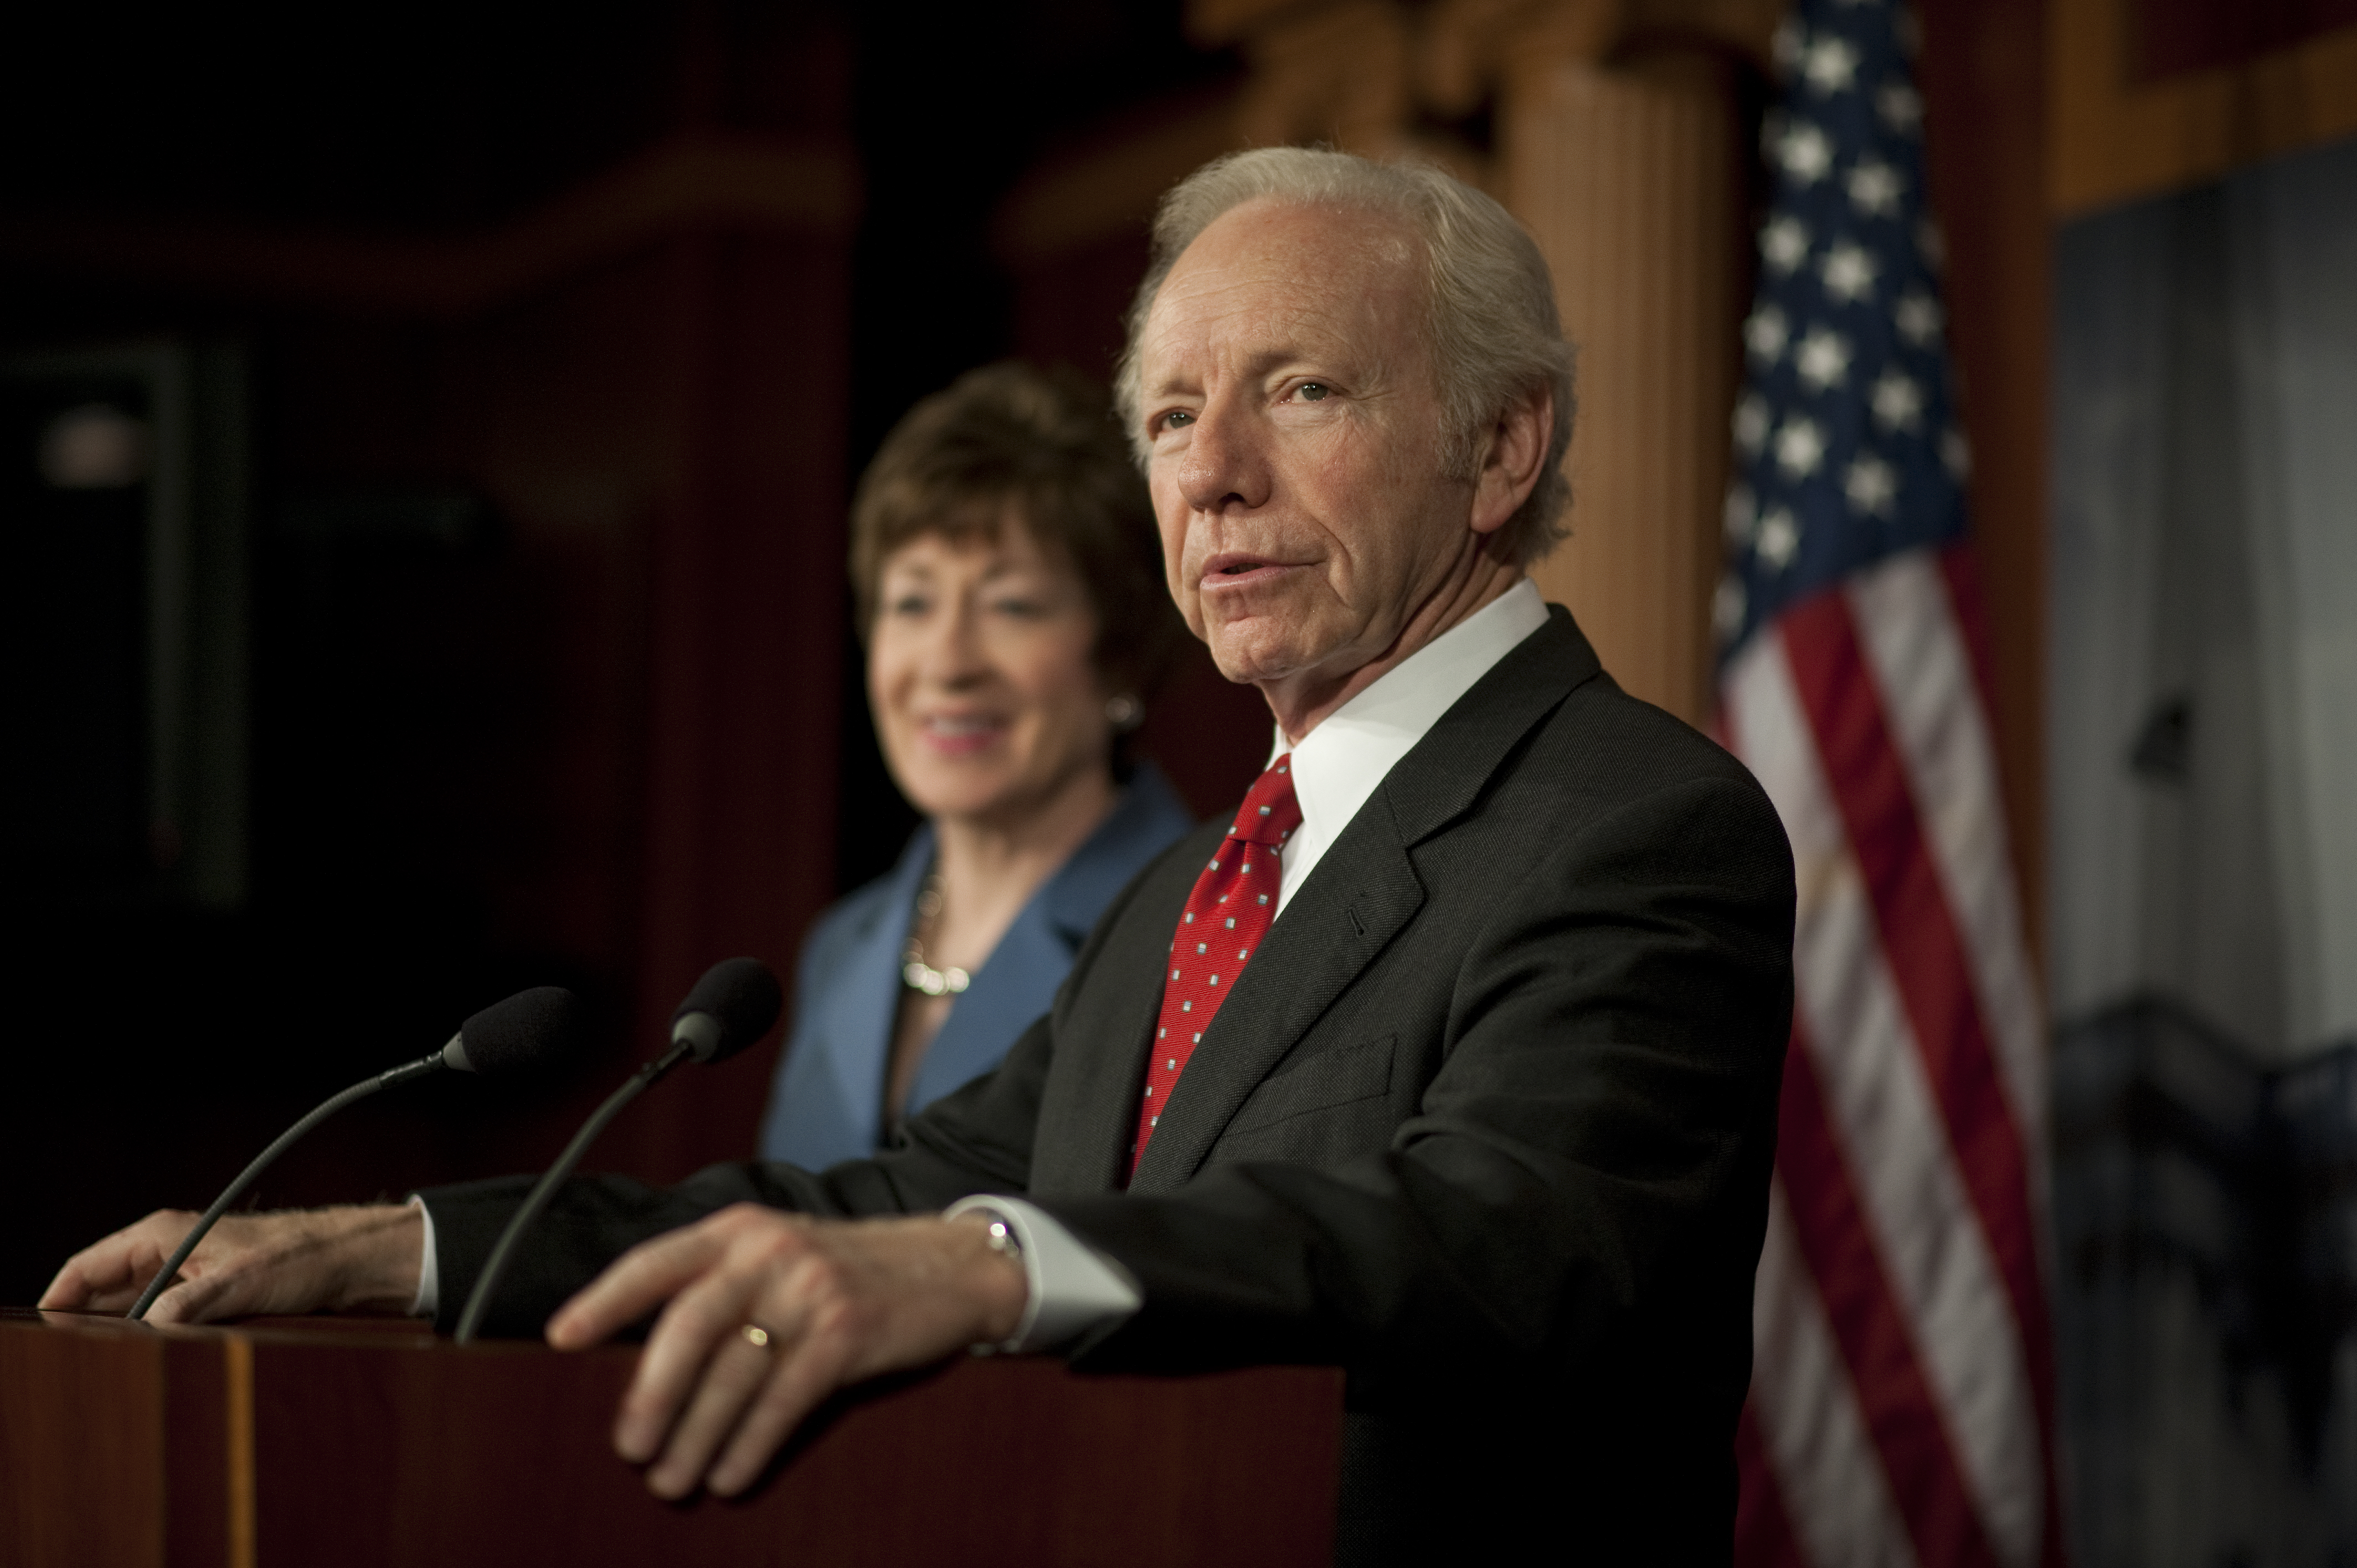 Sen. Joseph Lieberman, I-CT., during a press conference in the Senate Studio in the U.S. Capitol  in Washington on December 31, 2012. (Douglas Graham—CQ-Roll Call/Getty Images)